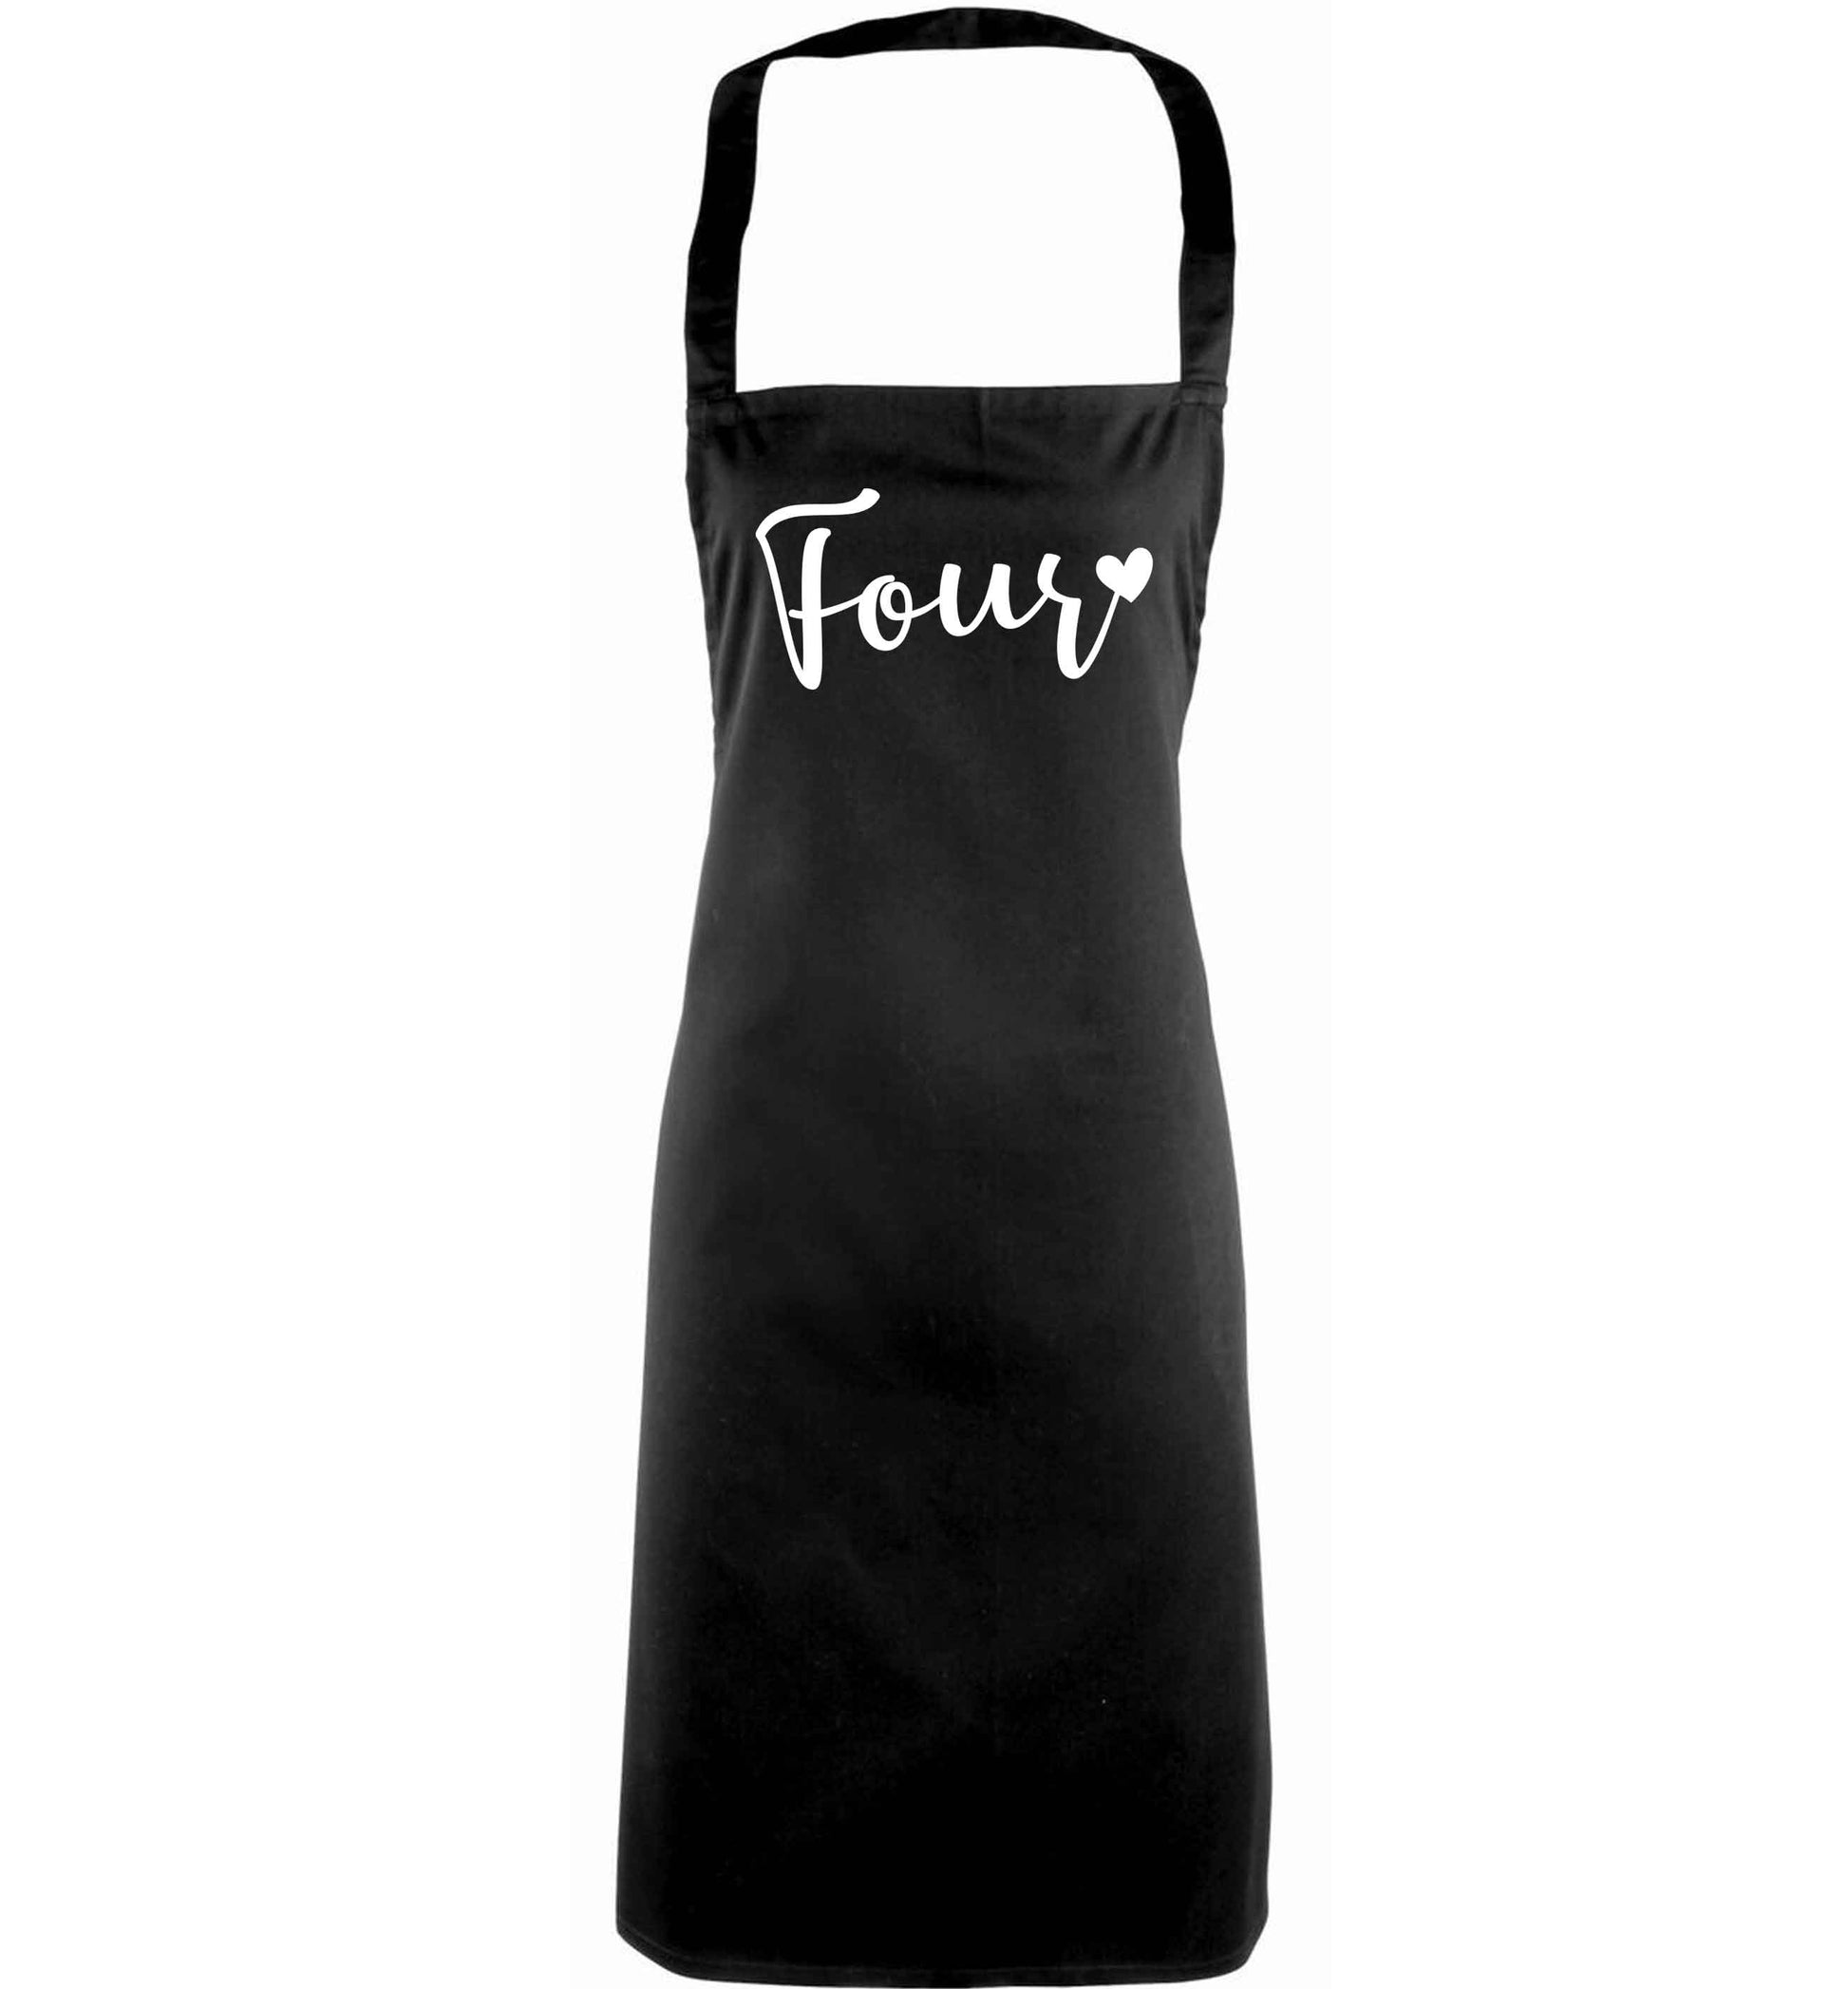 Four and heart adults black apron